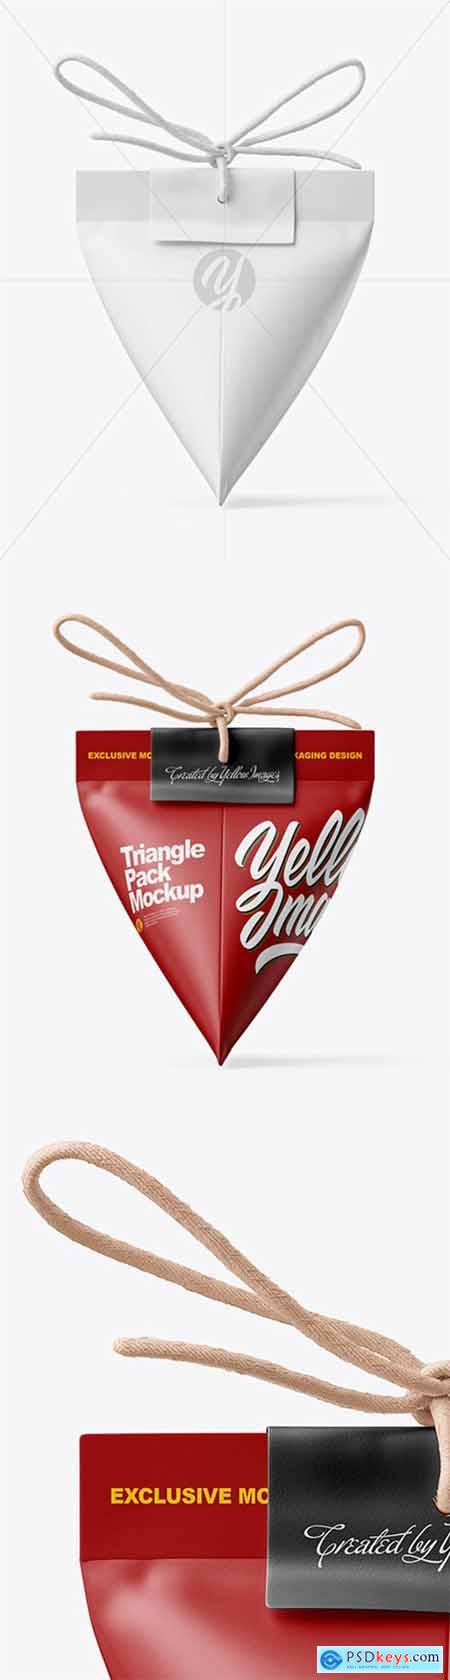 Triangle Matte Paper Packaging With Rope Bow Mockup 64559